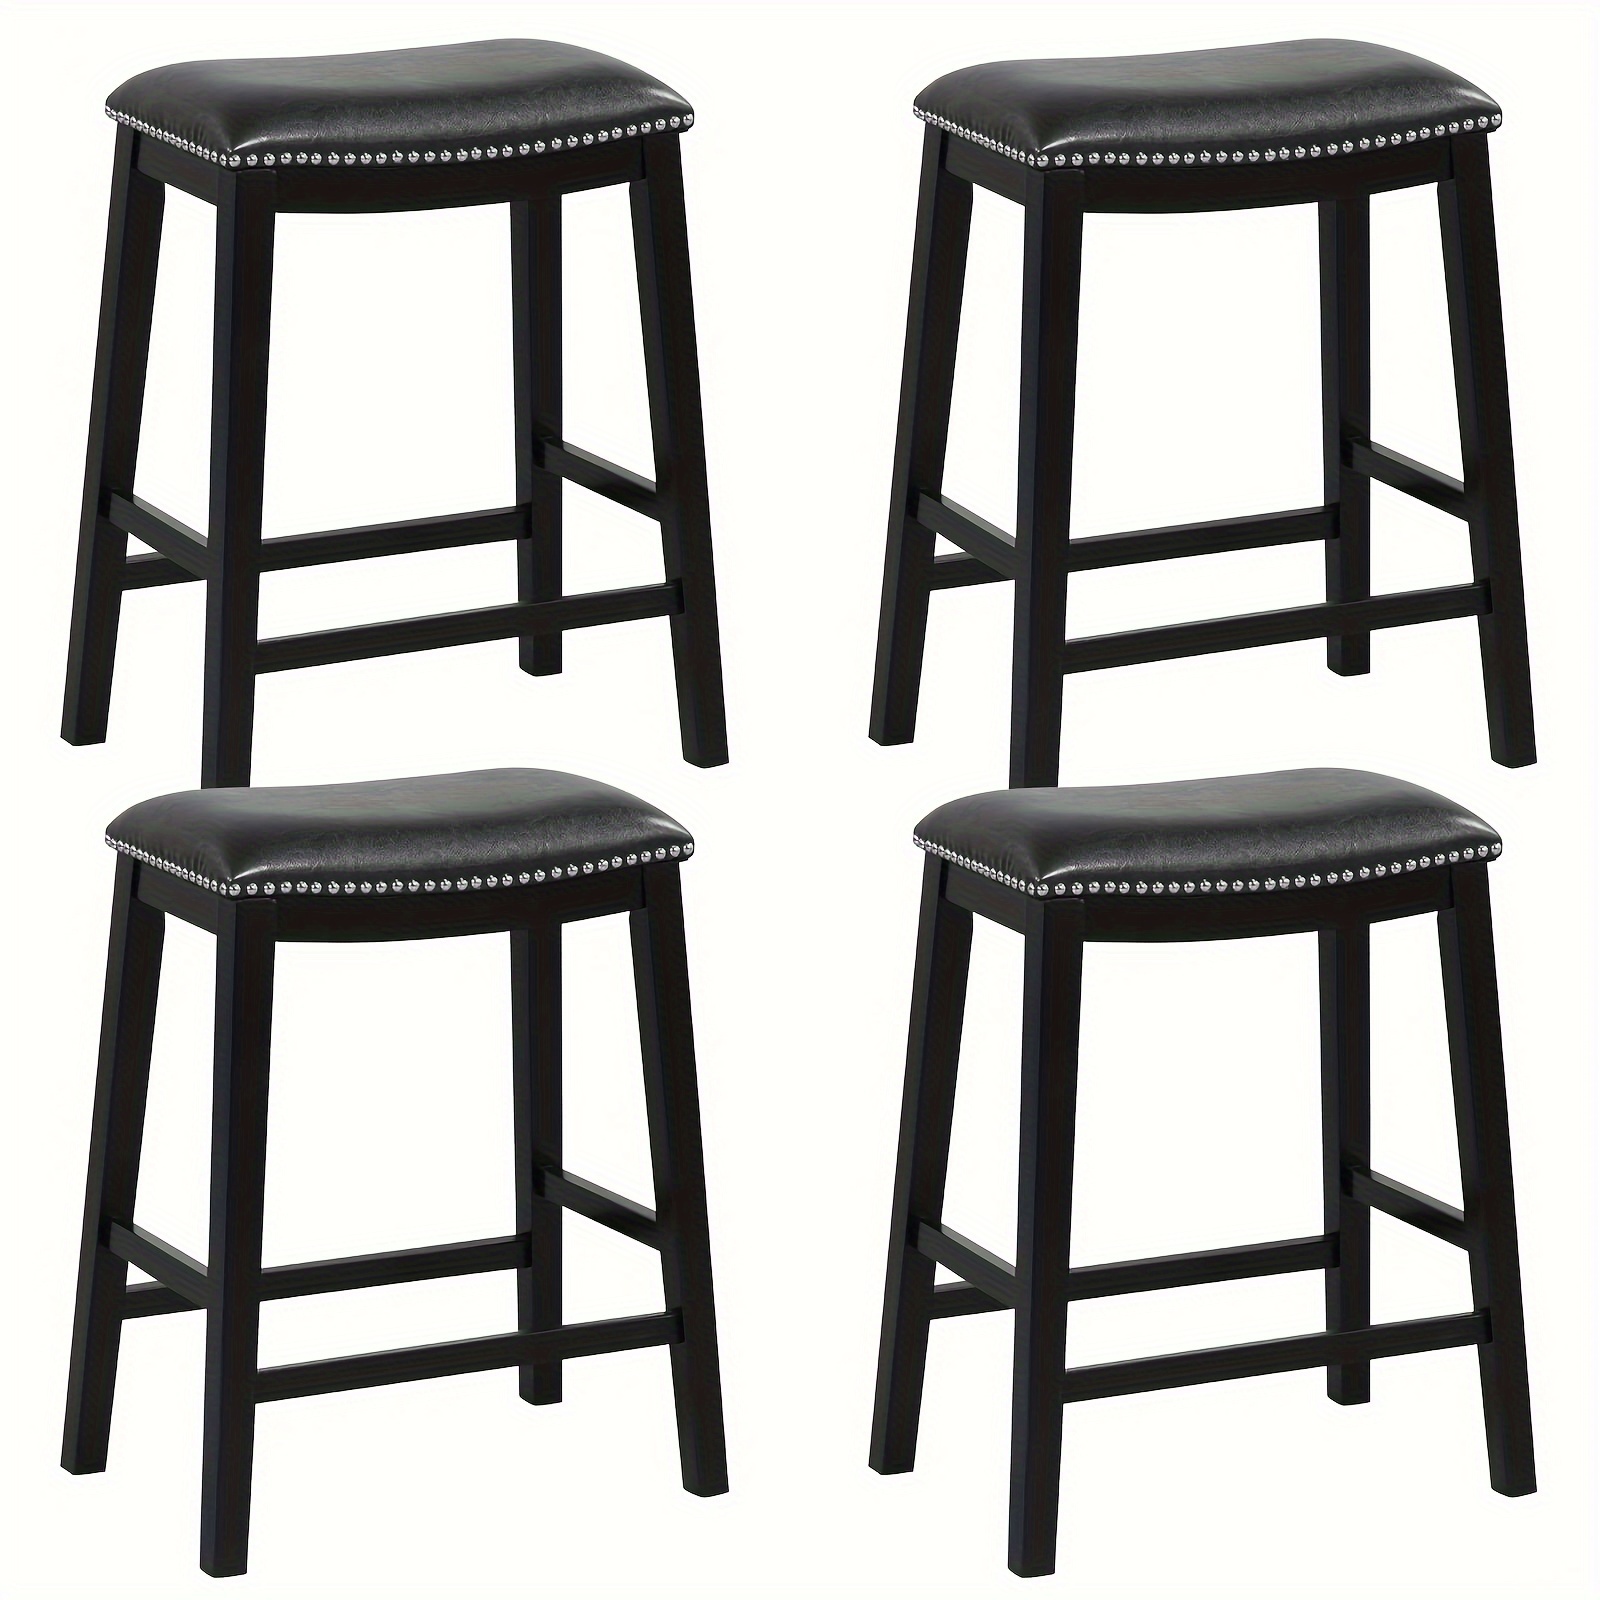 

1set/4pcs 26-inch Bar Stool, Set Of 4, Counter Height Saddle Stools With Upholstered Seat